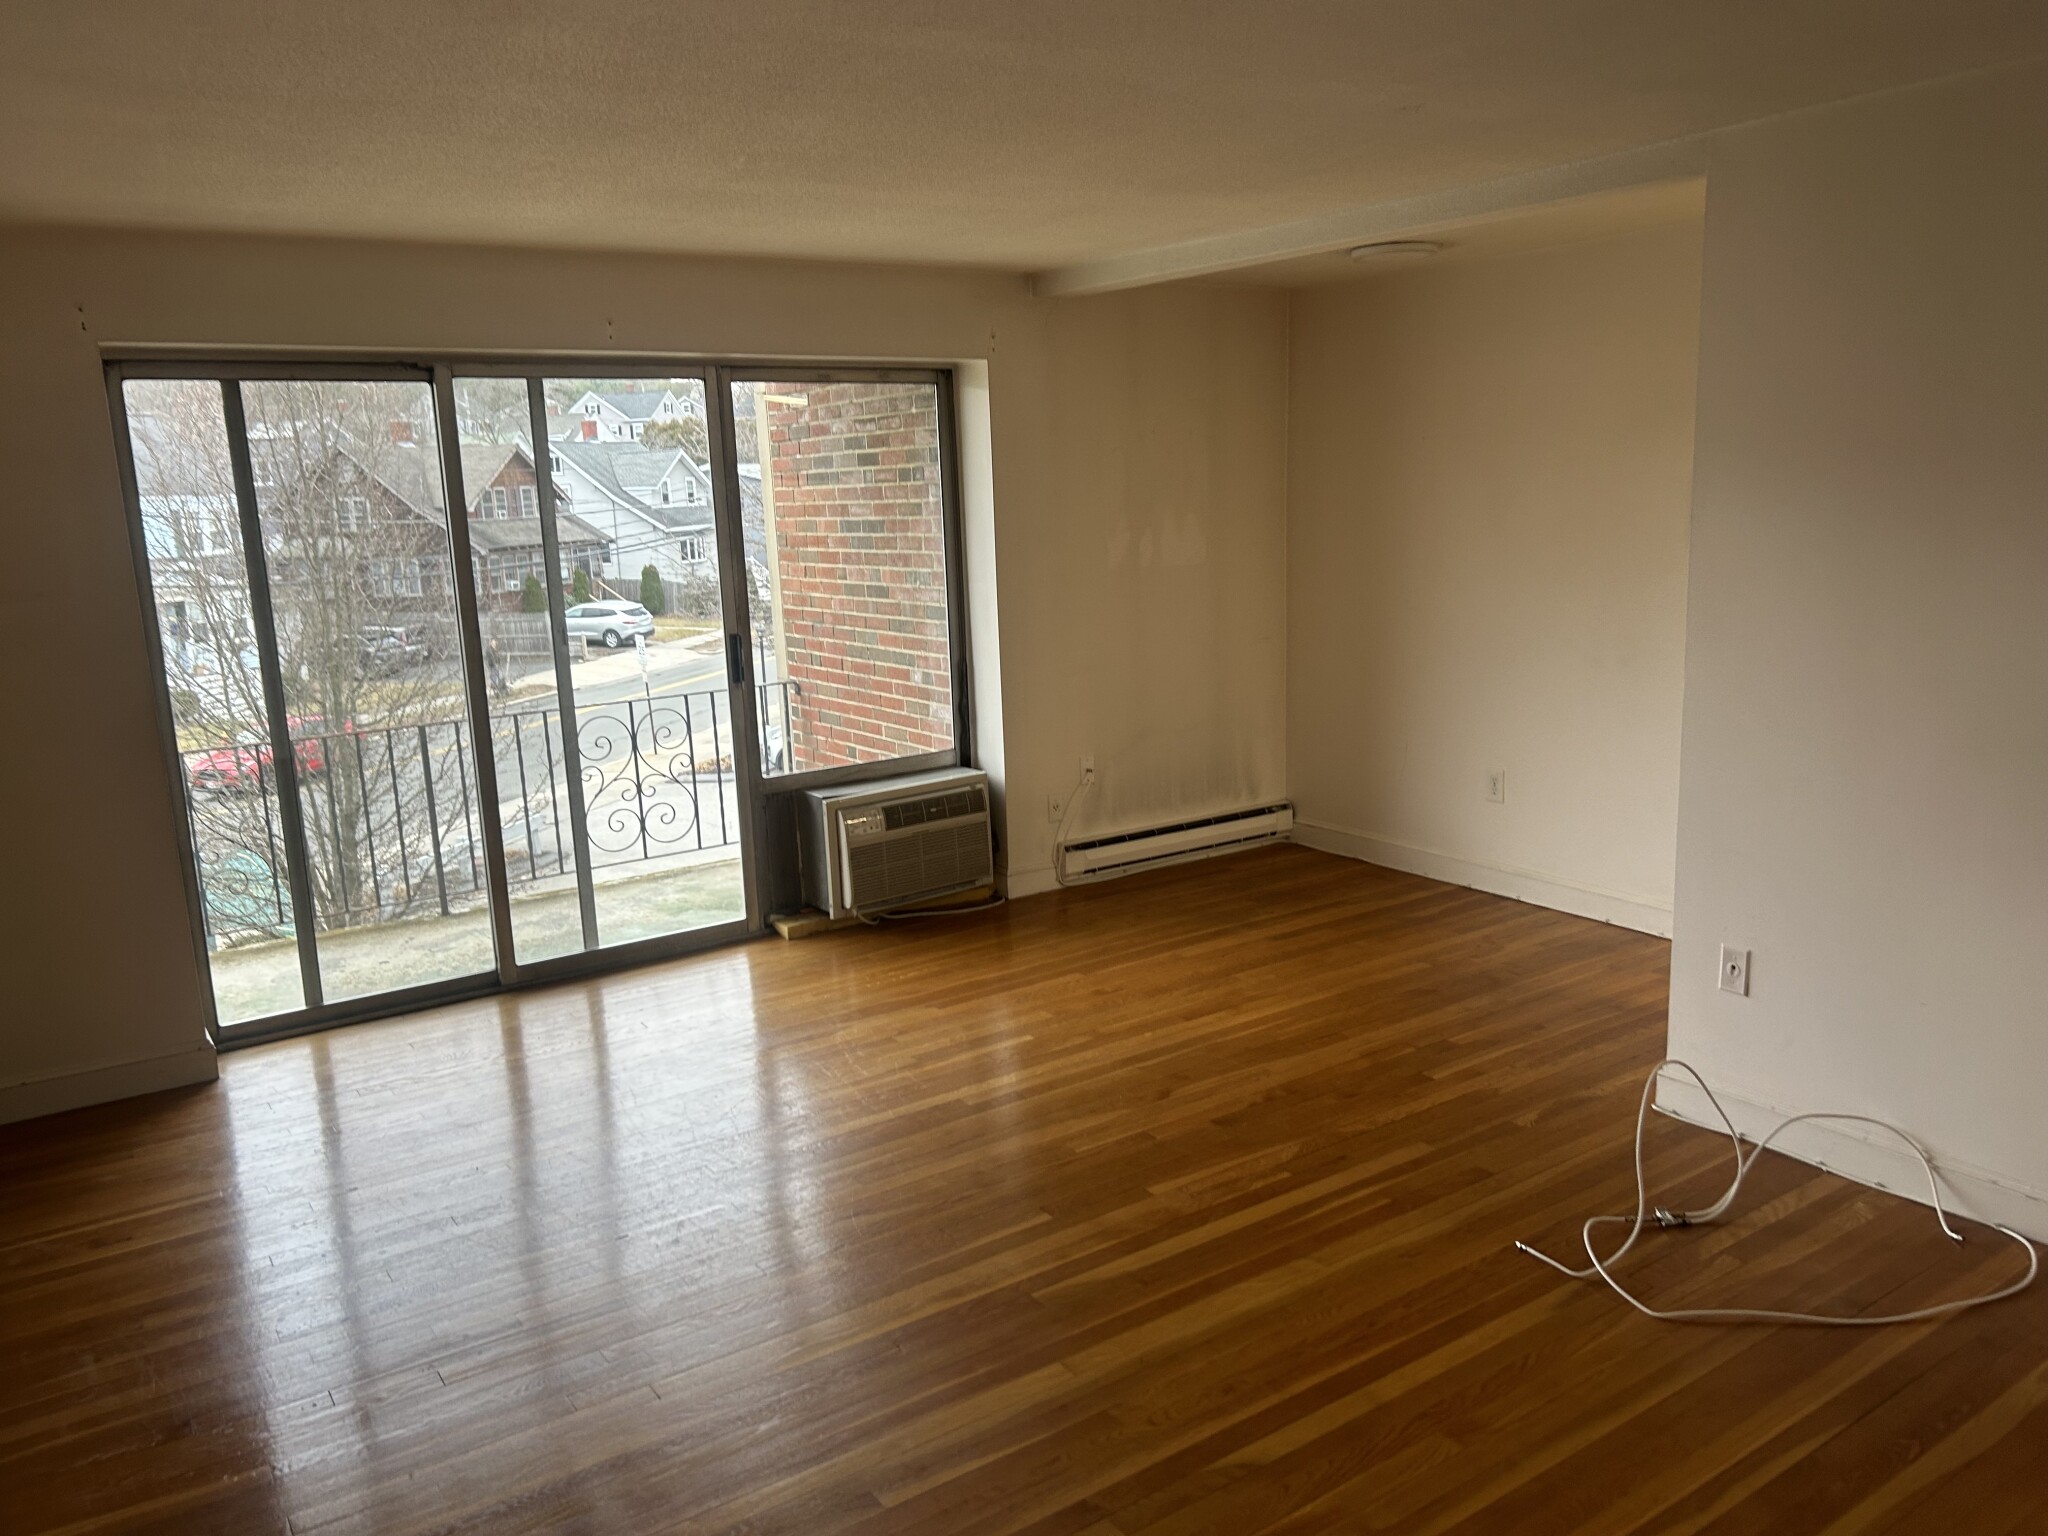 Photos of apartment on Myrtle St.,Melrose MA 02176